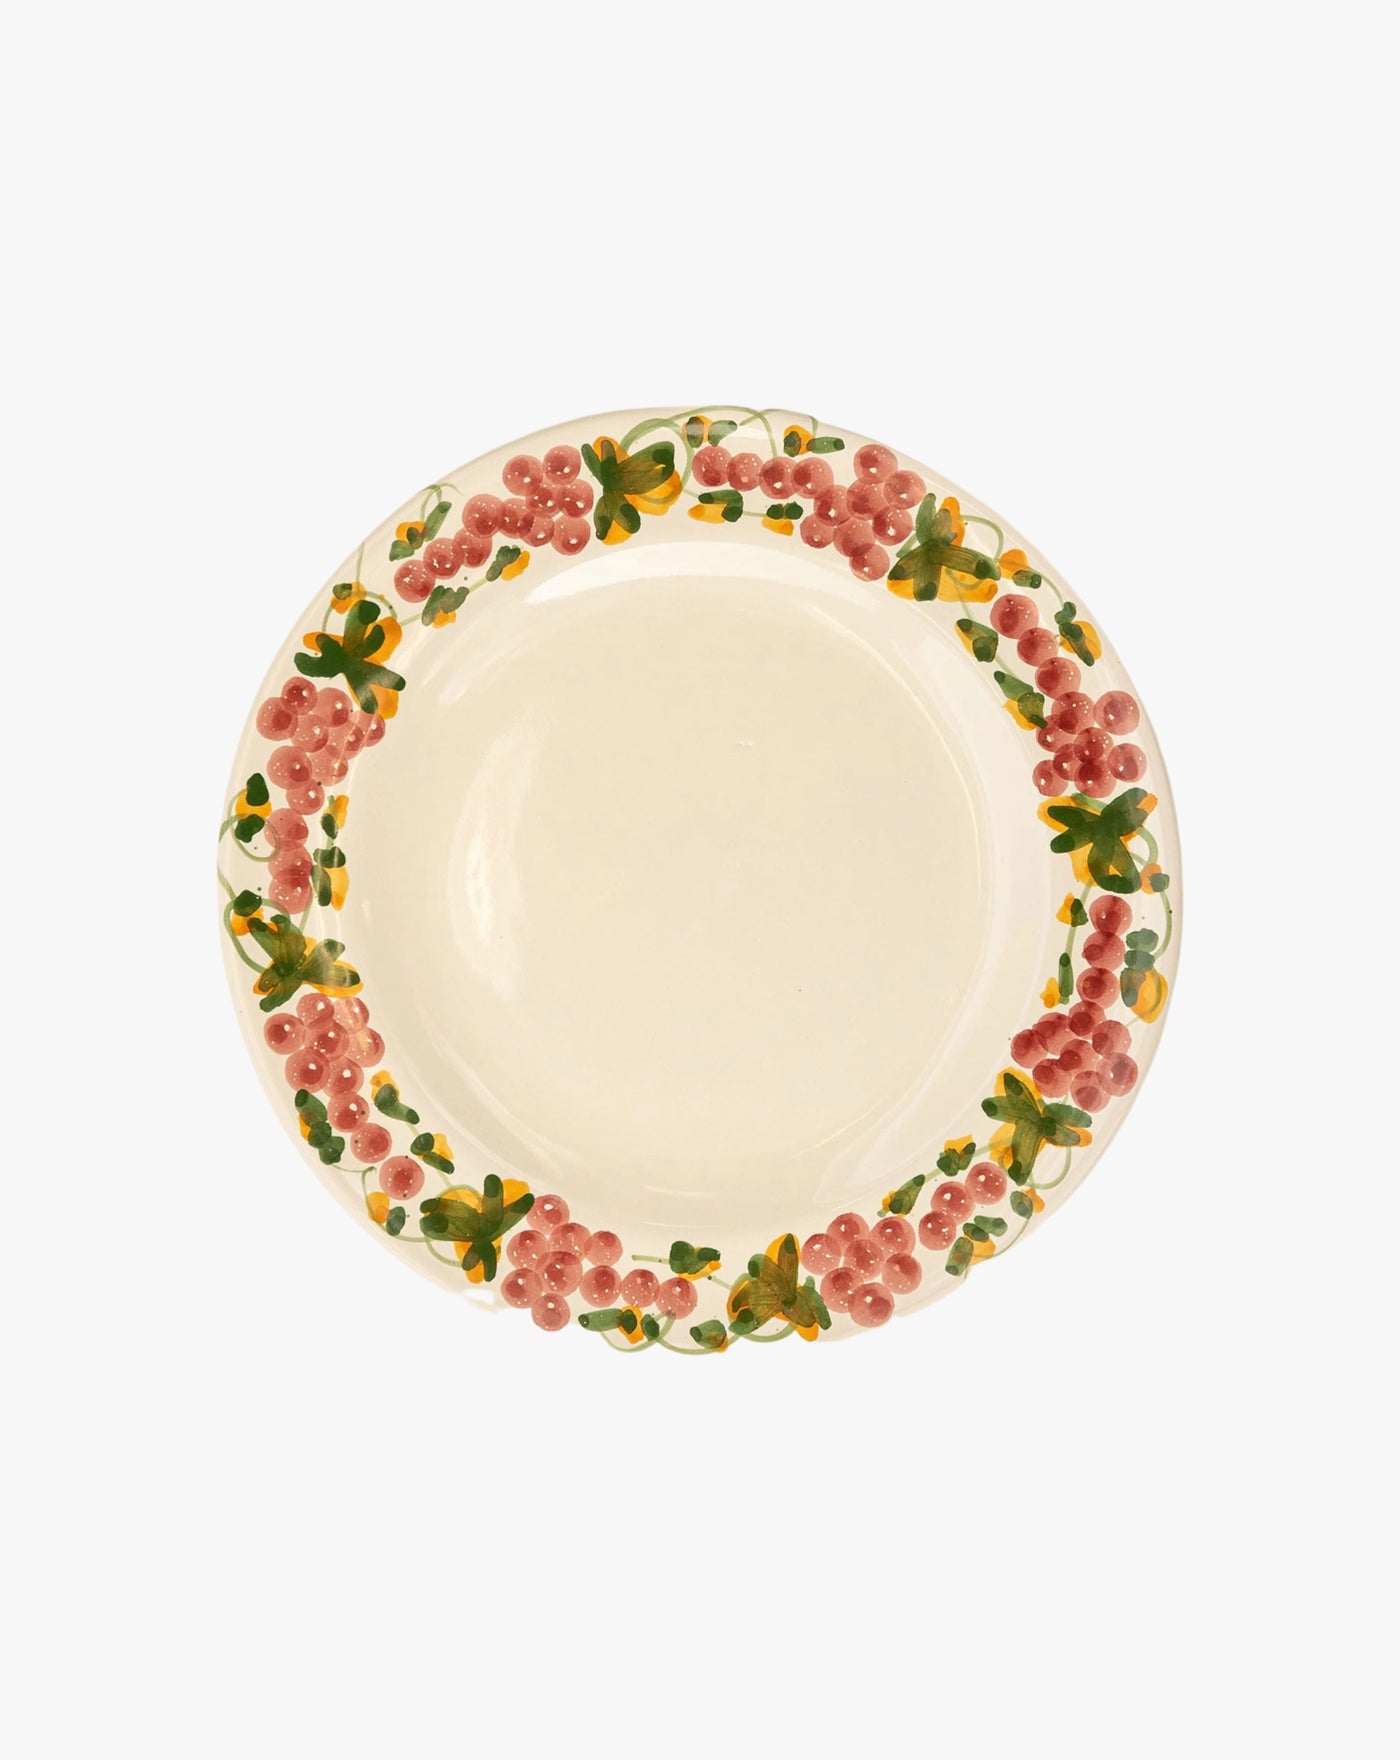 Plate Vine Dinner Plate Green and Pink Sharland England Limited